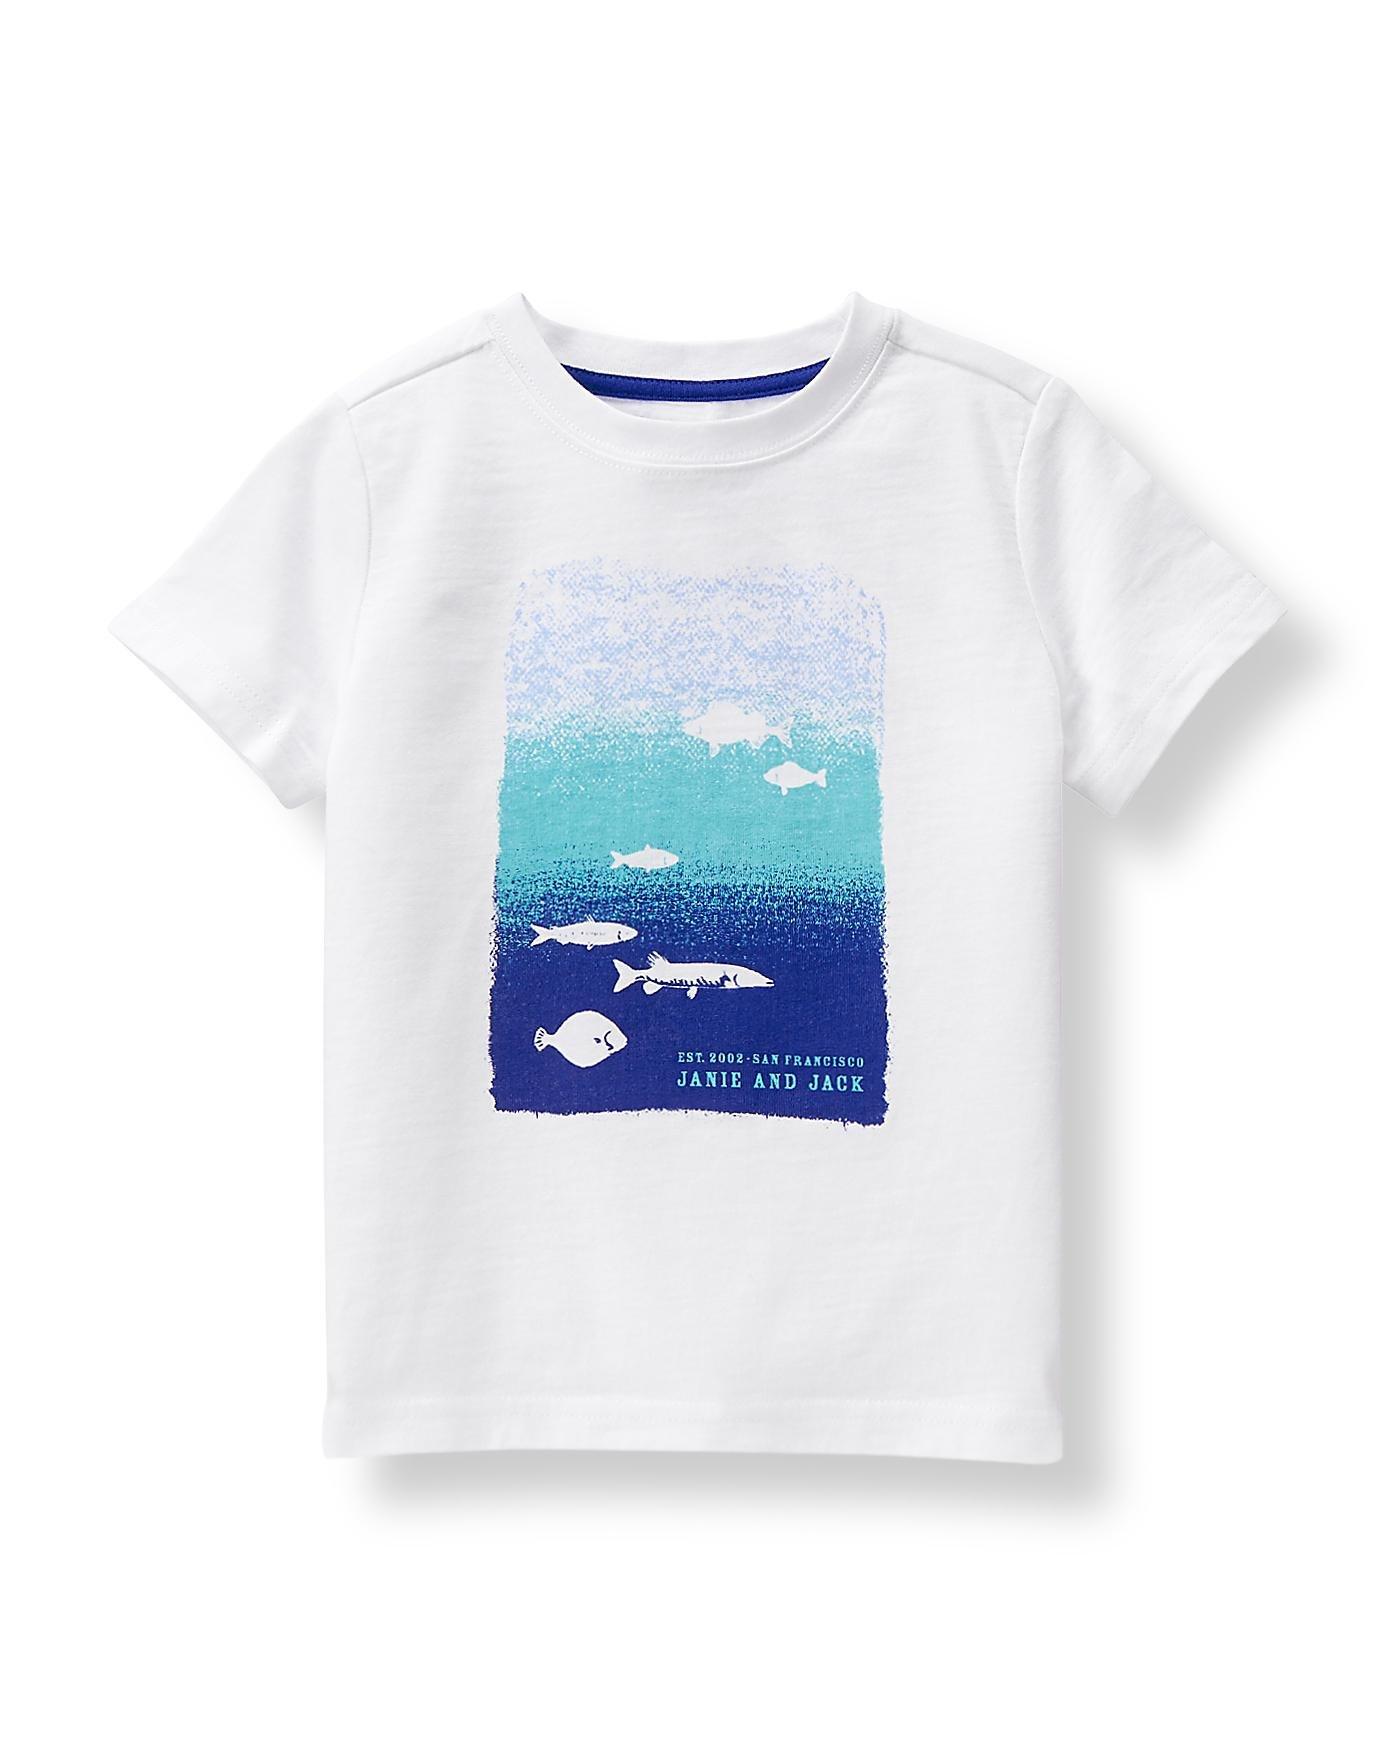 Under The Sea Tee image number 0